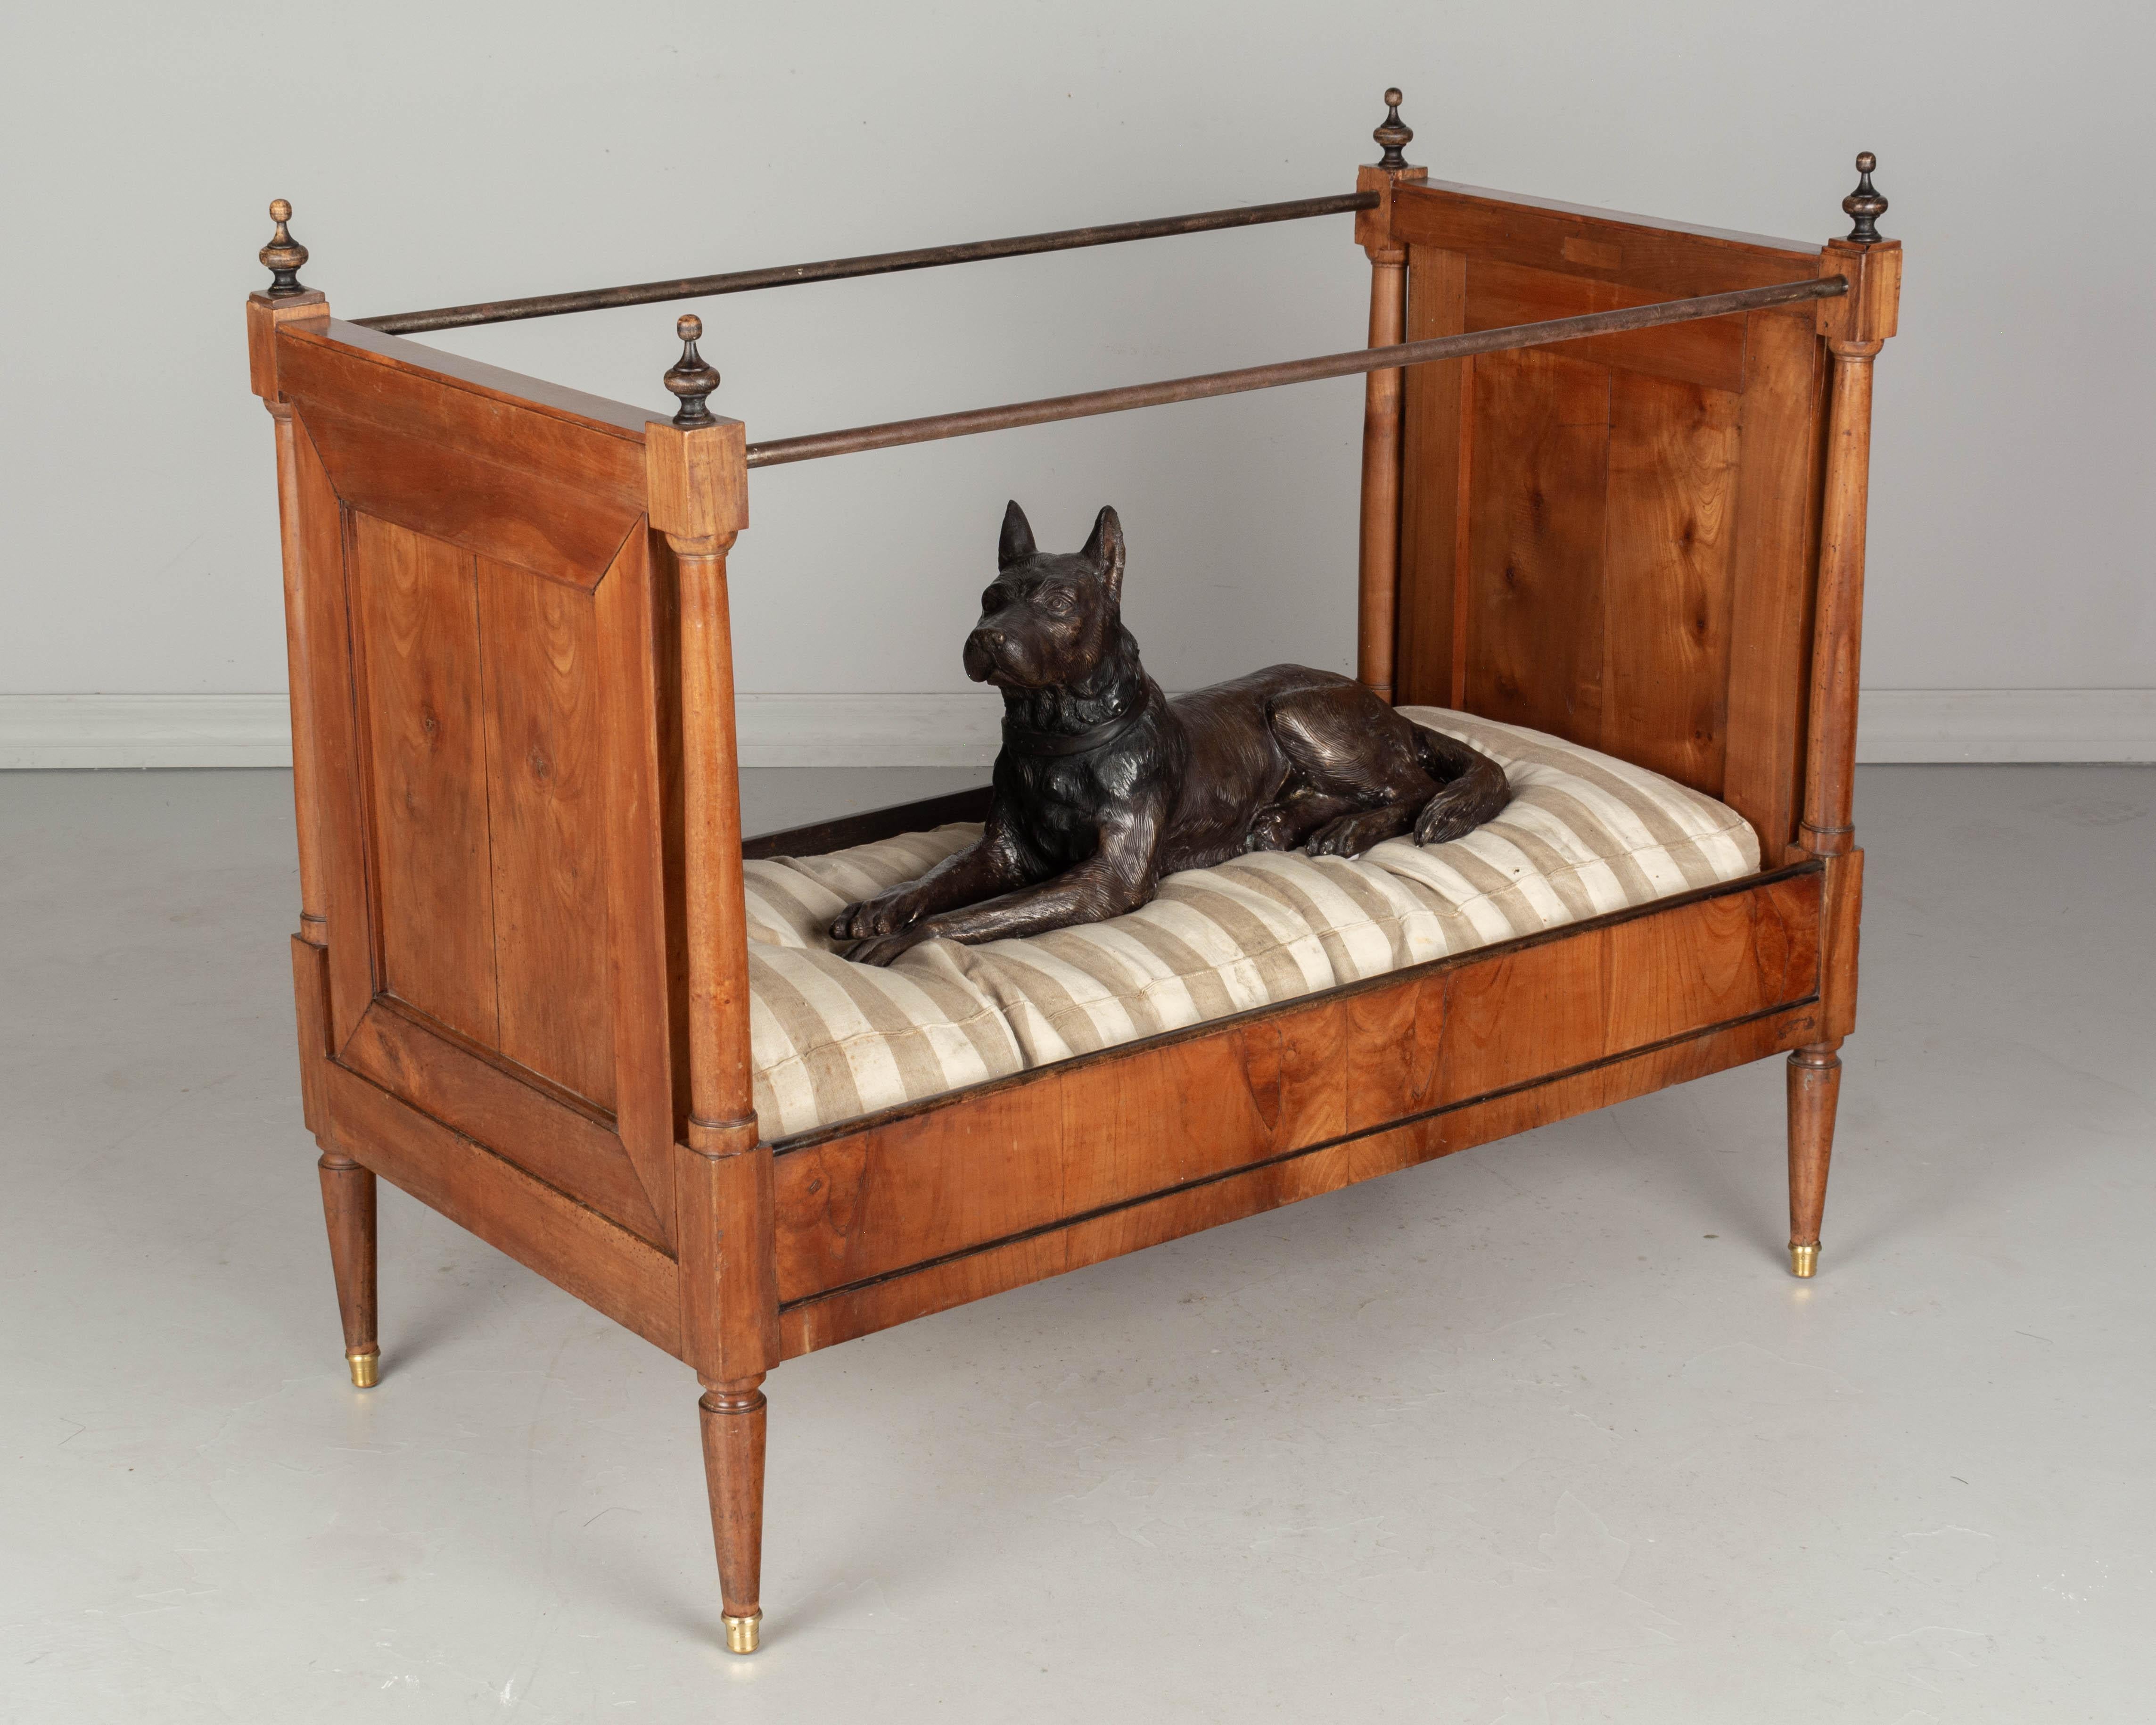 A 19th century French Napoleon III Period child's bed made of solid cherry wood, with column form supports and iron curtain rails. Beautiful book matched wood panels and side rails with ebonized trim. Old mattress upholstered in striped ticking